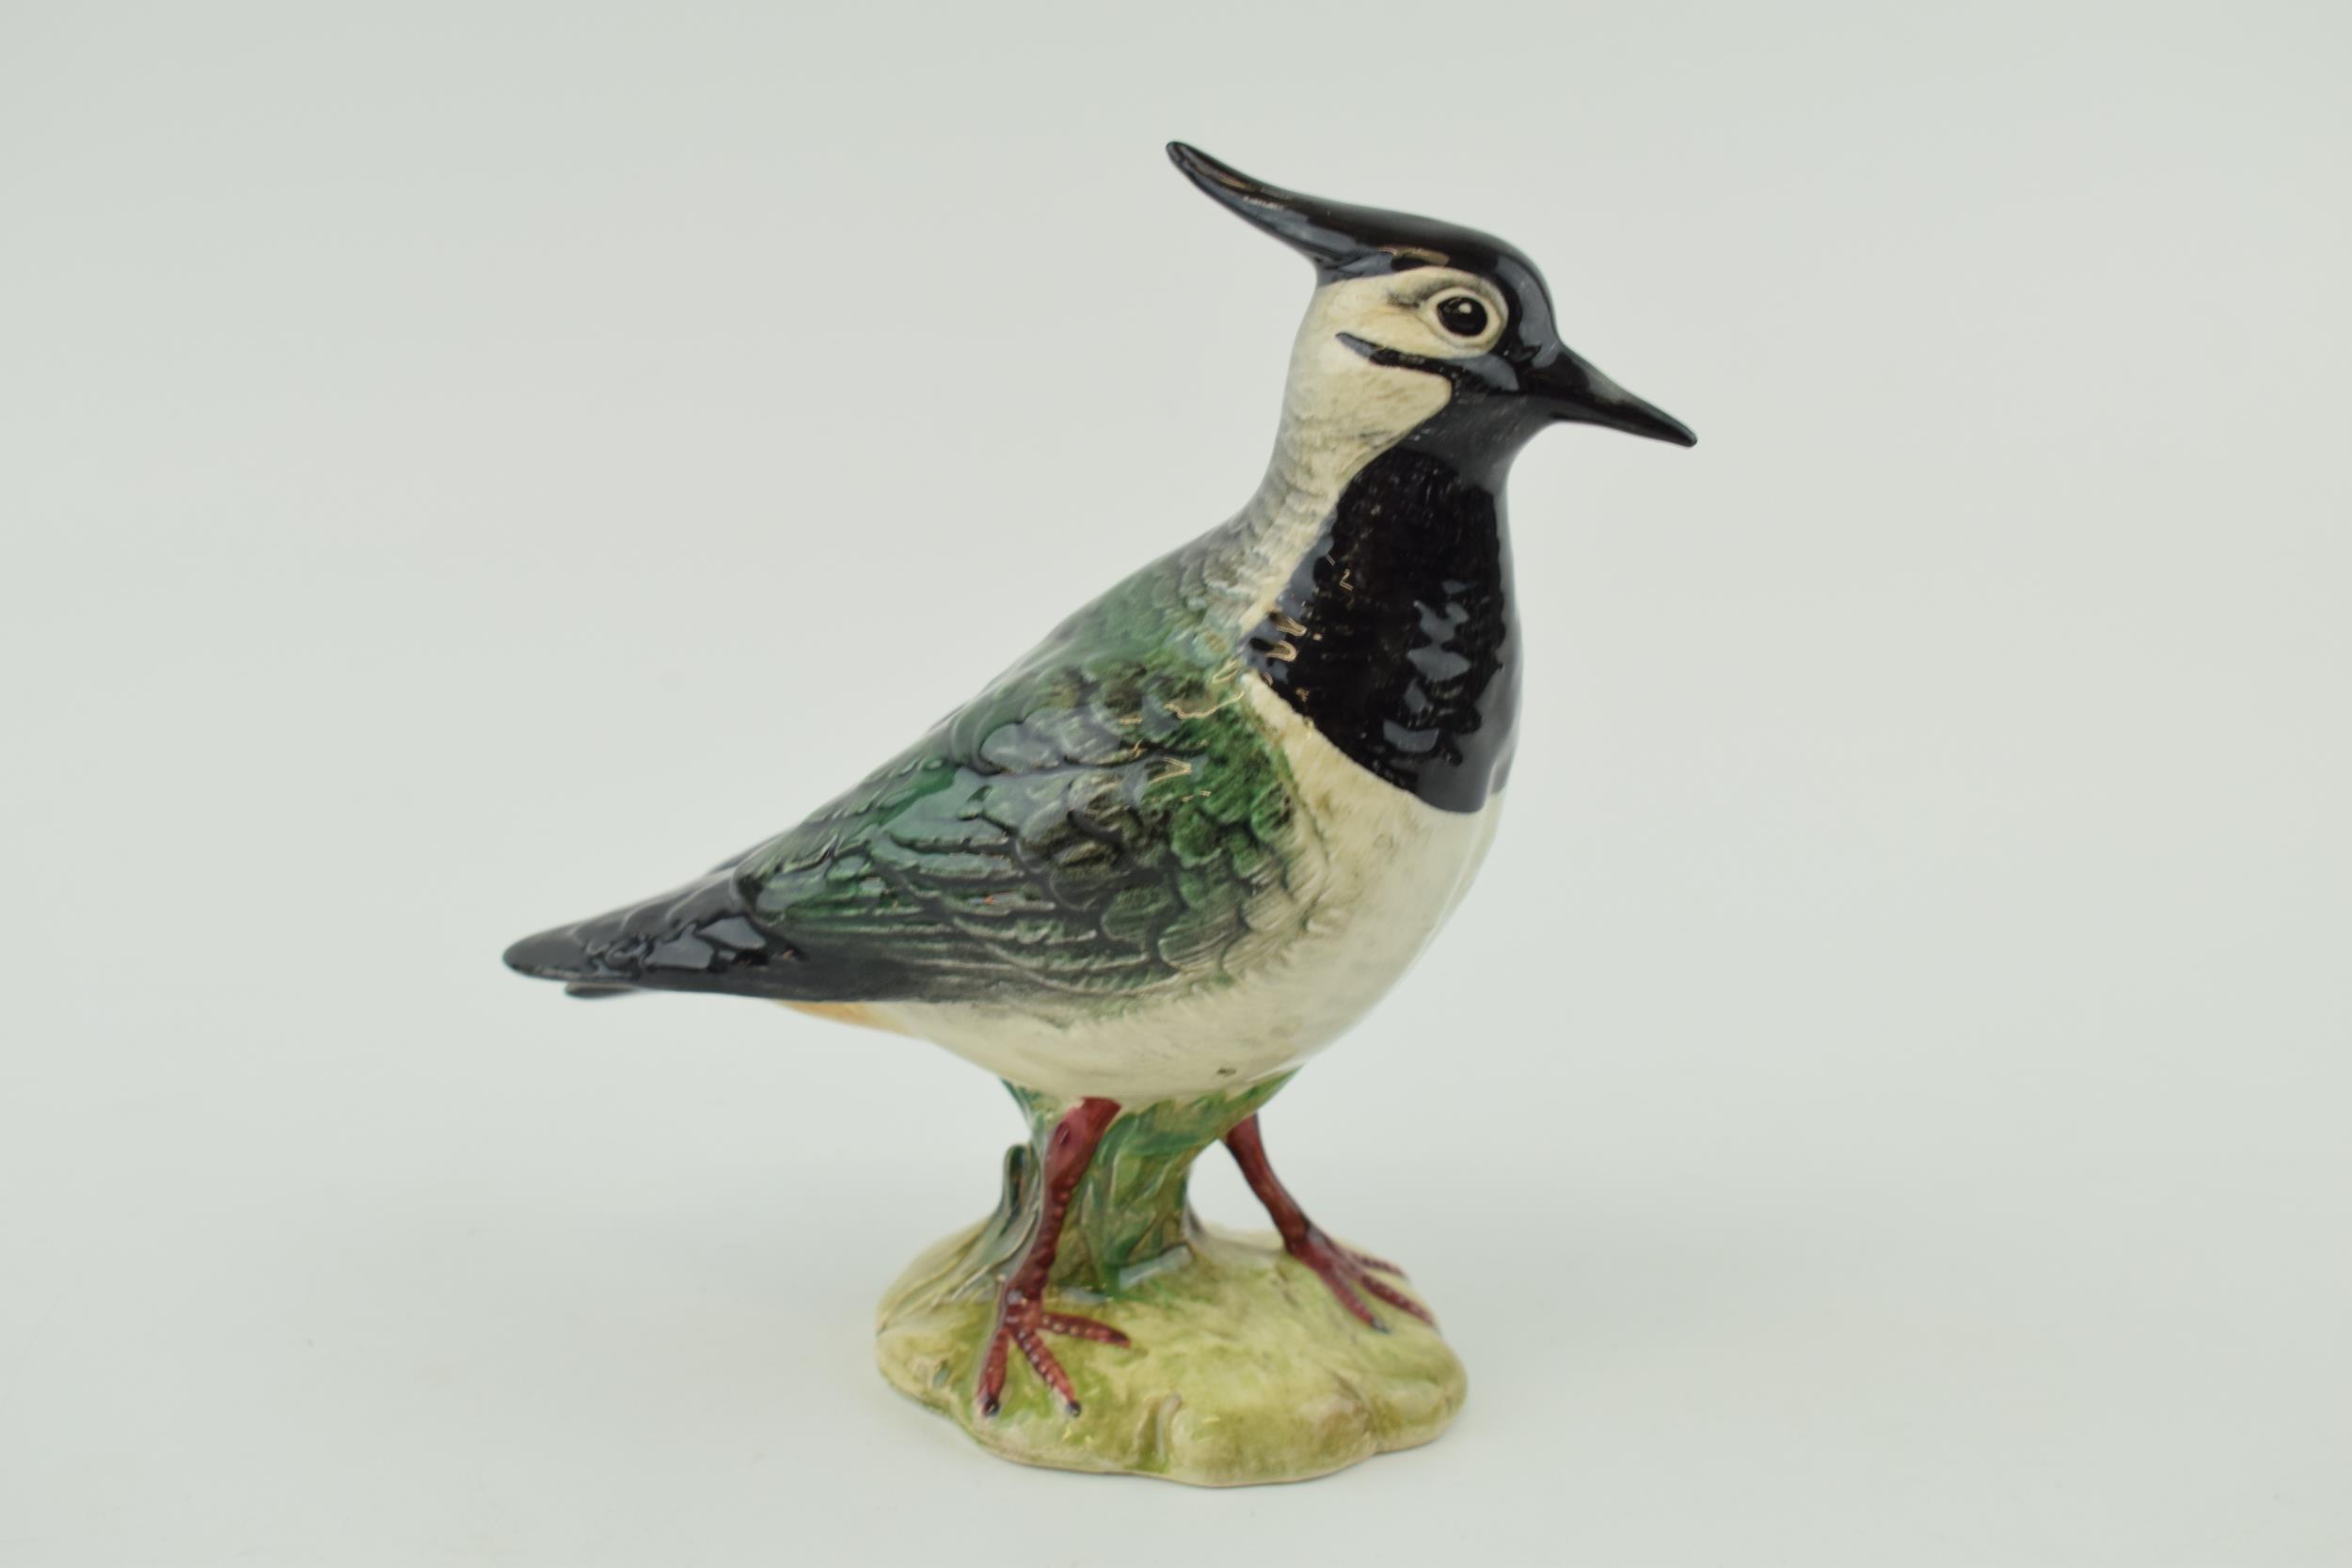 Beswick Lapwing 2416 first version with open leg. In good condition with no obvious damage or - Image 2 of 2